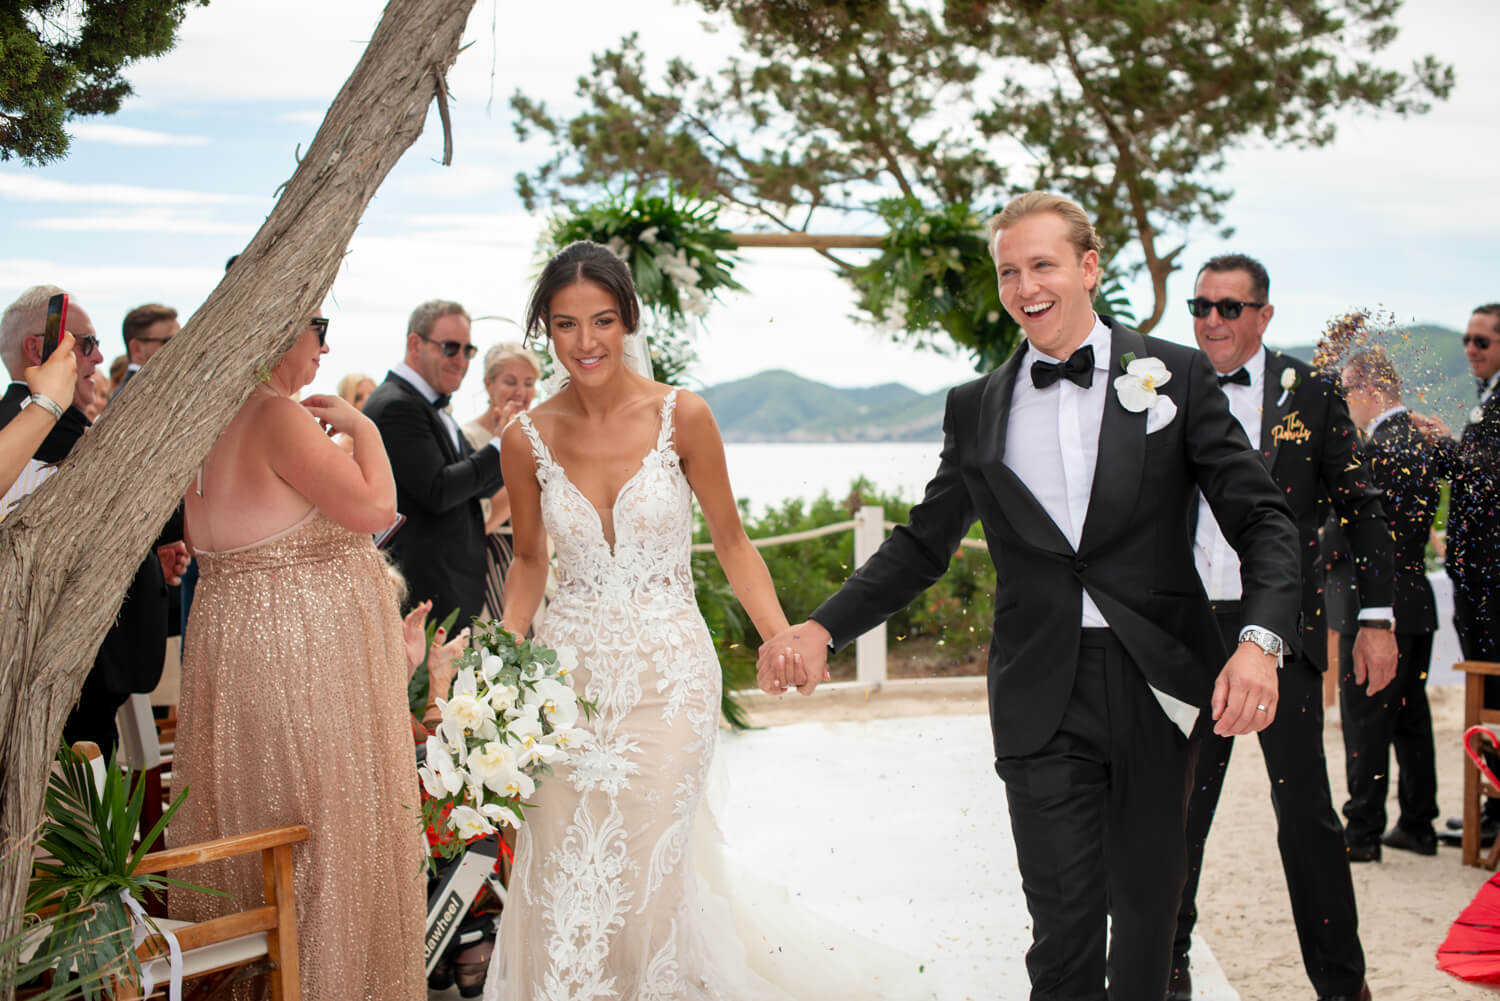 Bride and groom at Nikki beach, Ibiza just married